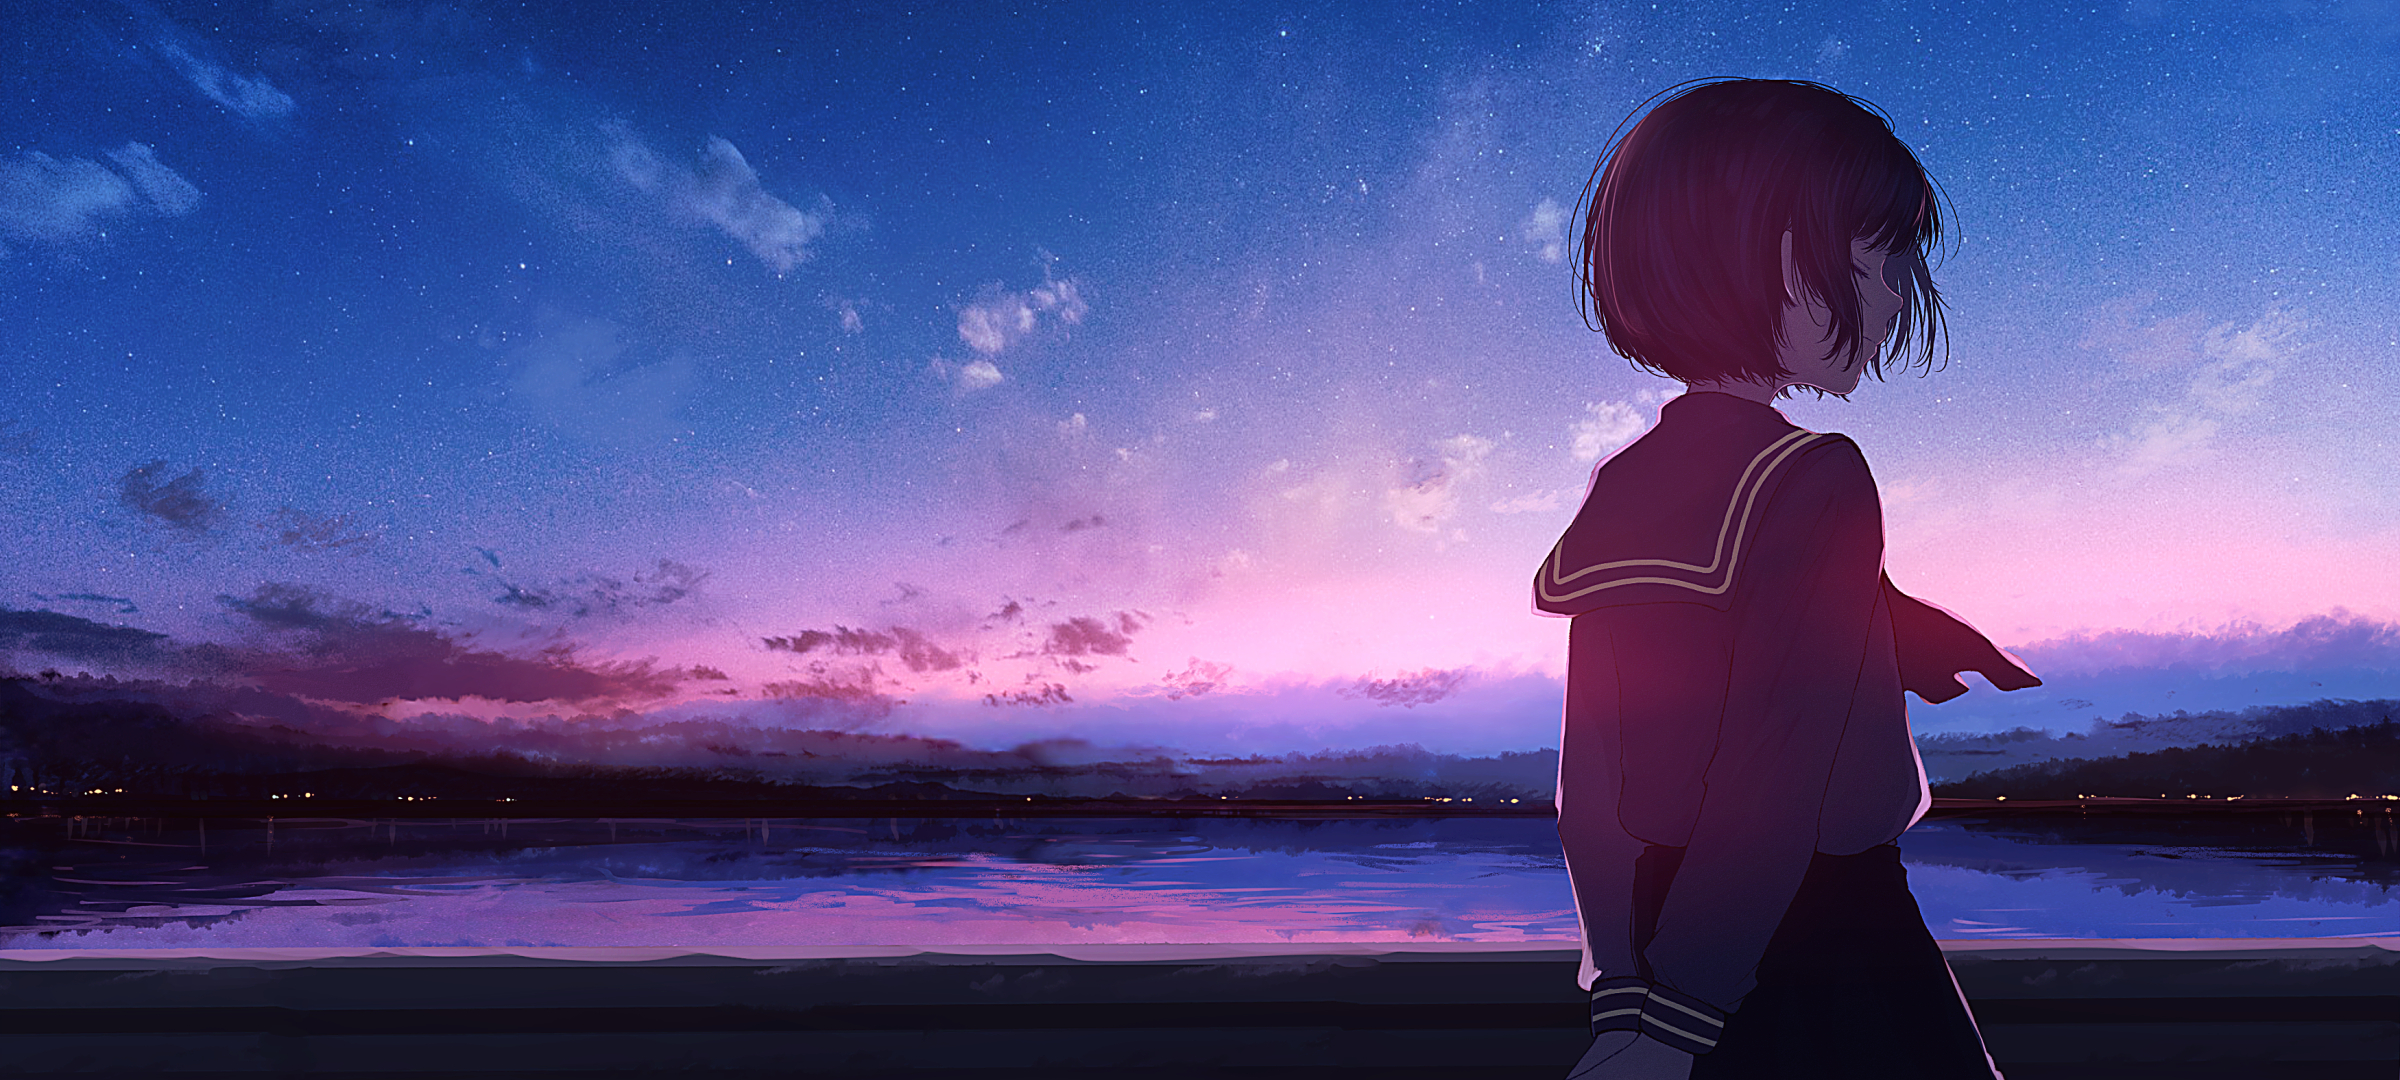 2400x1080 Anime Girl HD Landscape Cool Art 2400x1080 Resolution Wallpaper,  HD Artist 4K Wallpapers, Images, Photos and Background - Wallpapers Den